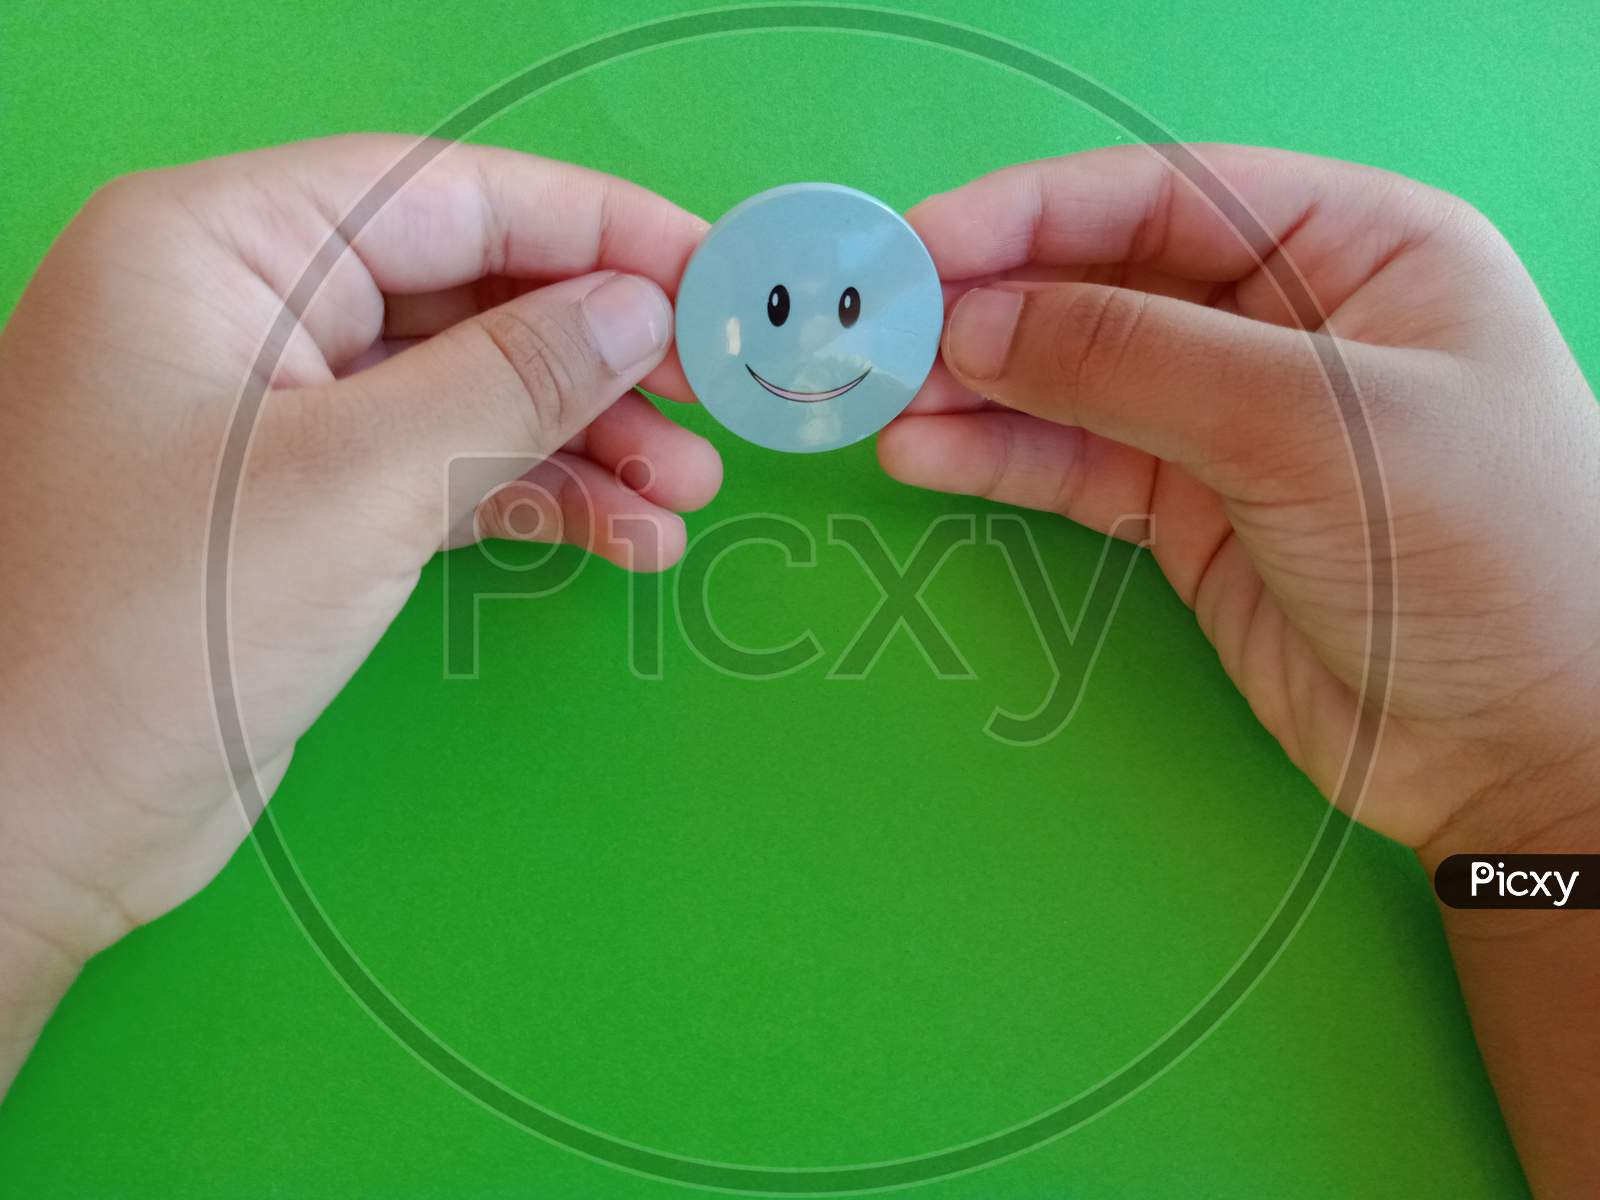 Small child's hand holding a smilie in green background